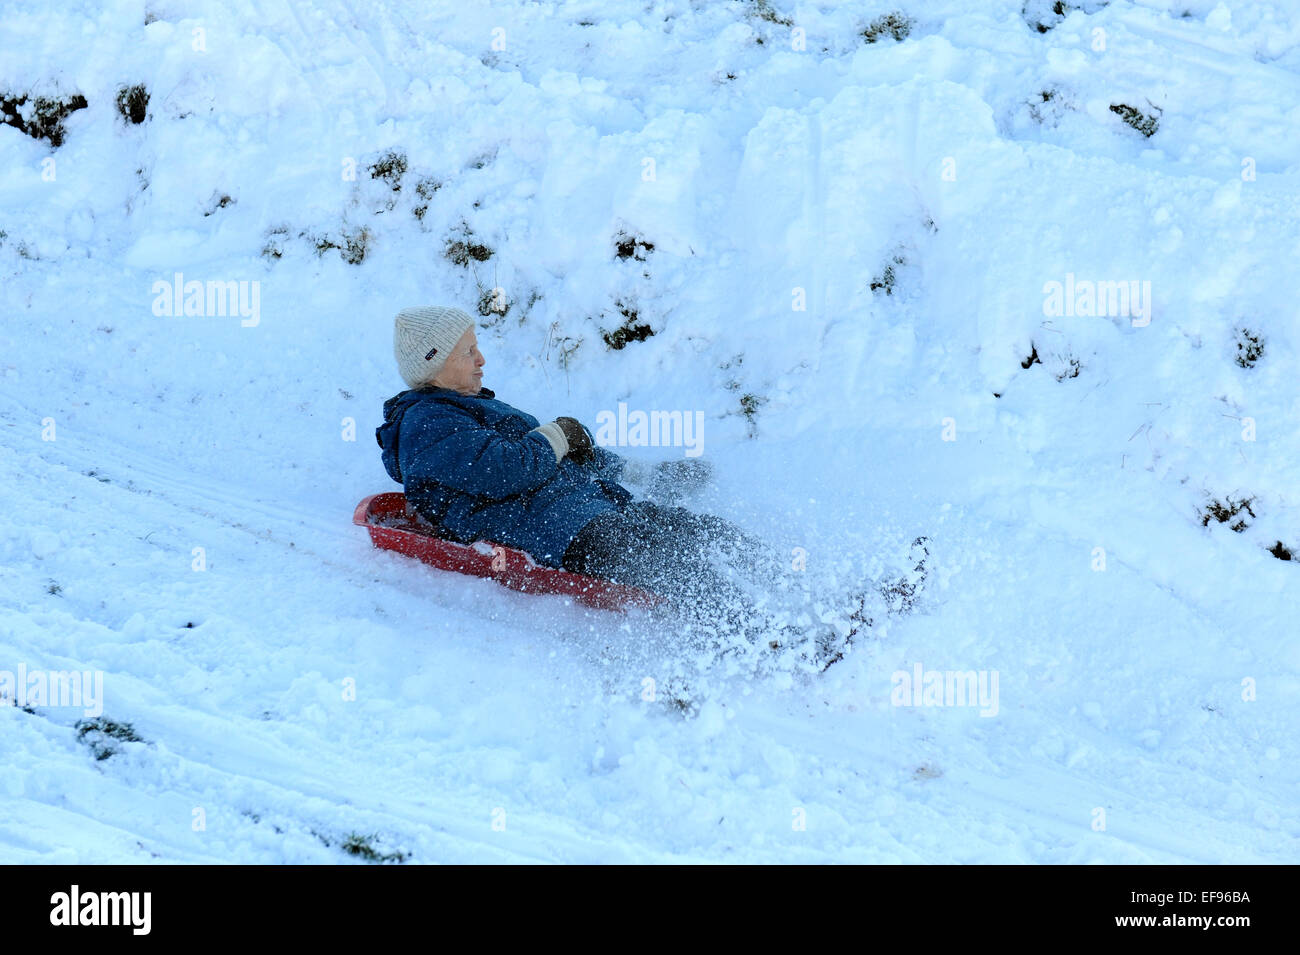 78 year old lady sledging down a snowy hillside Stock Photo